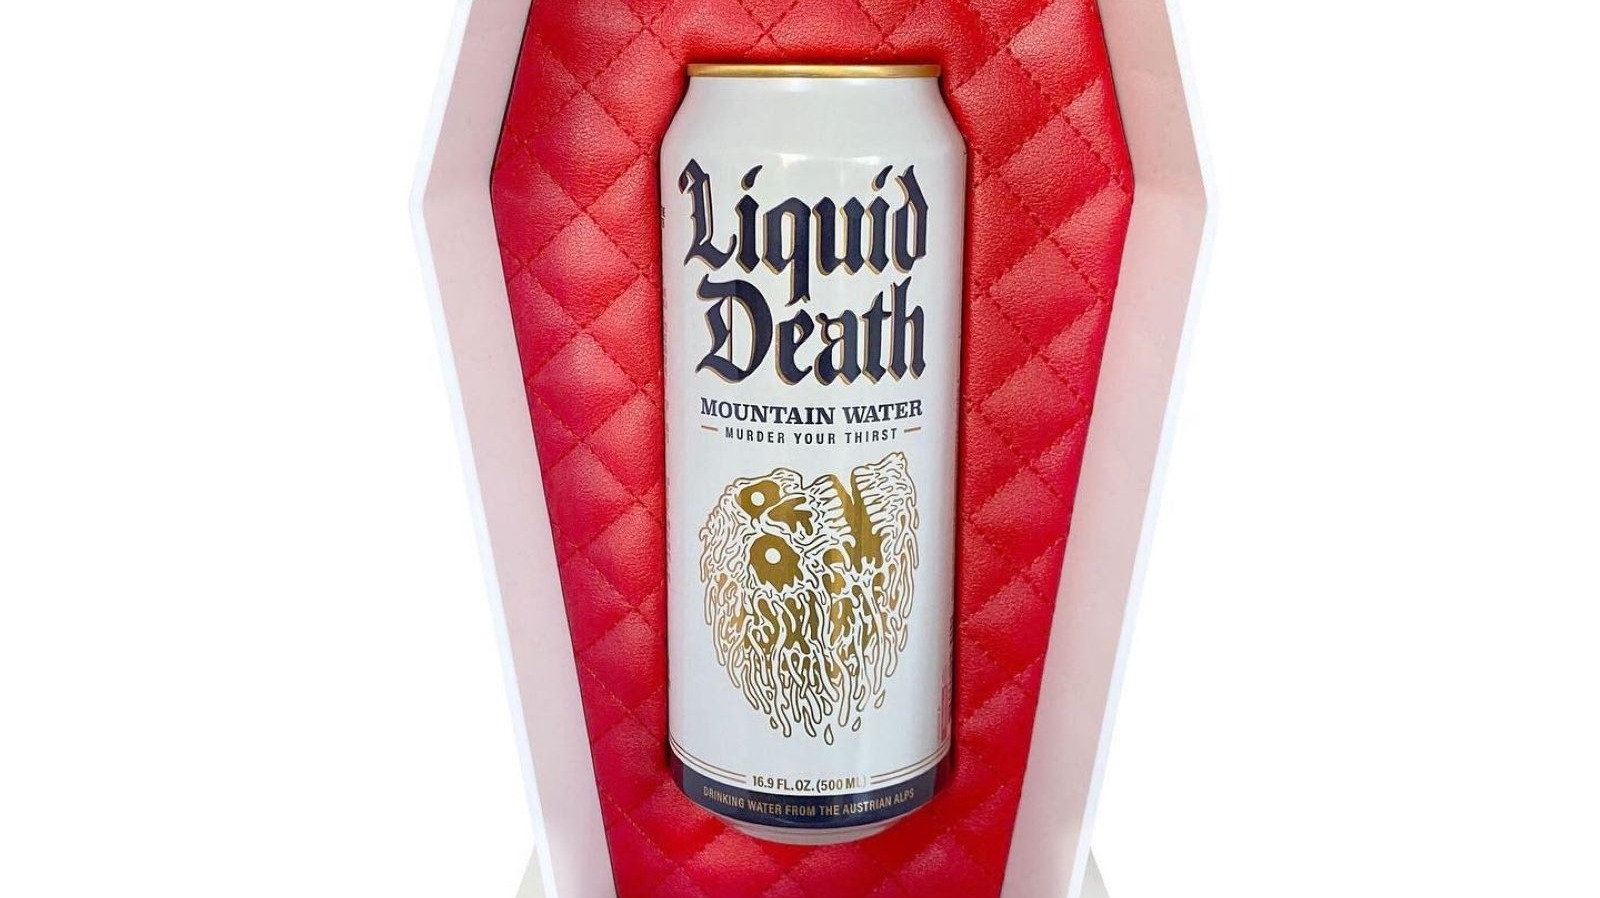 https://www.tastingtable.com/img/gallery/what-is-liquid-death-the-canned-water-trend-explained/l-intro-1682687538.jpg